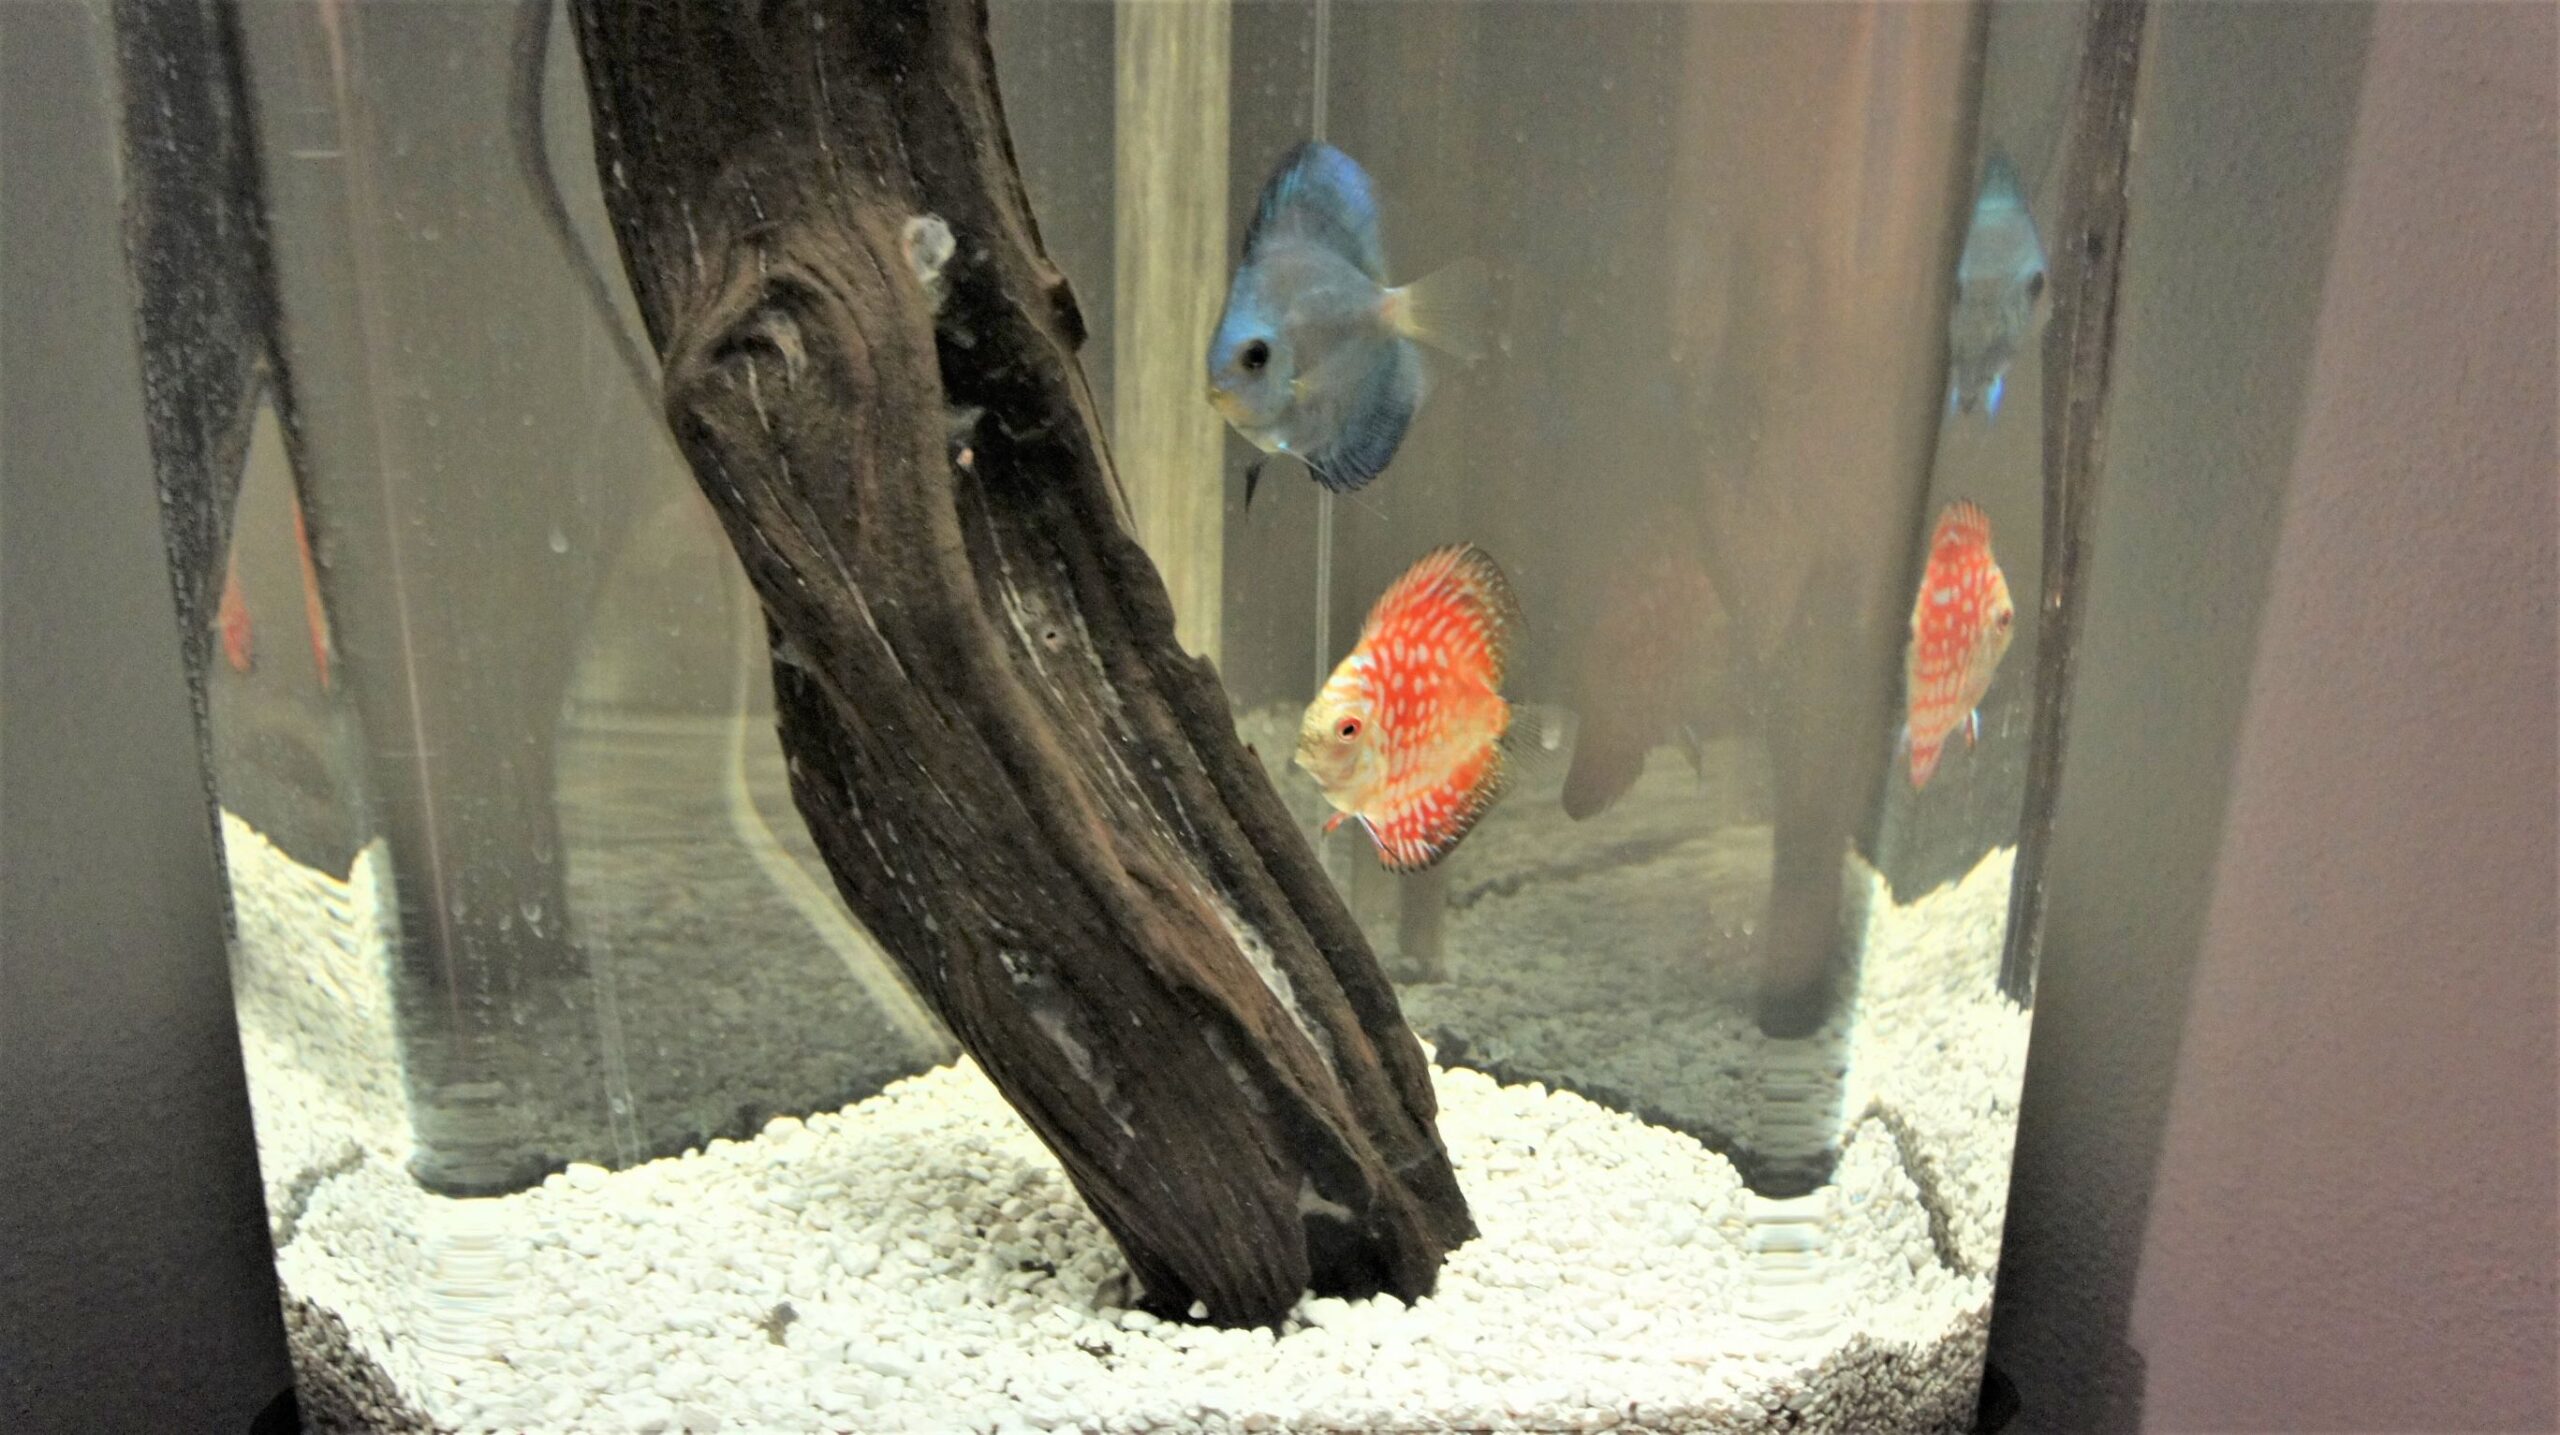 Discus fish with the best colors of blue and red